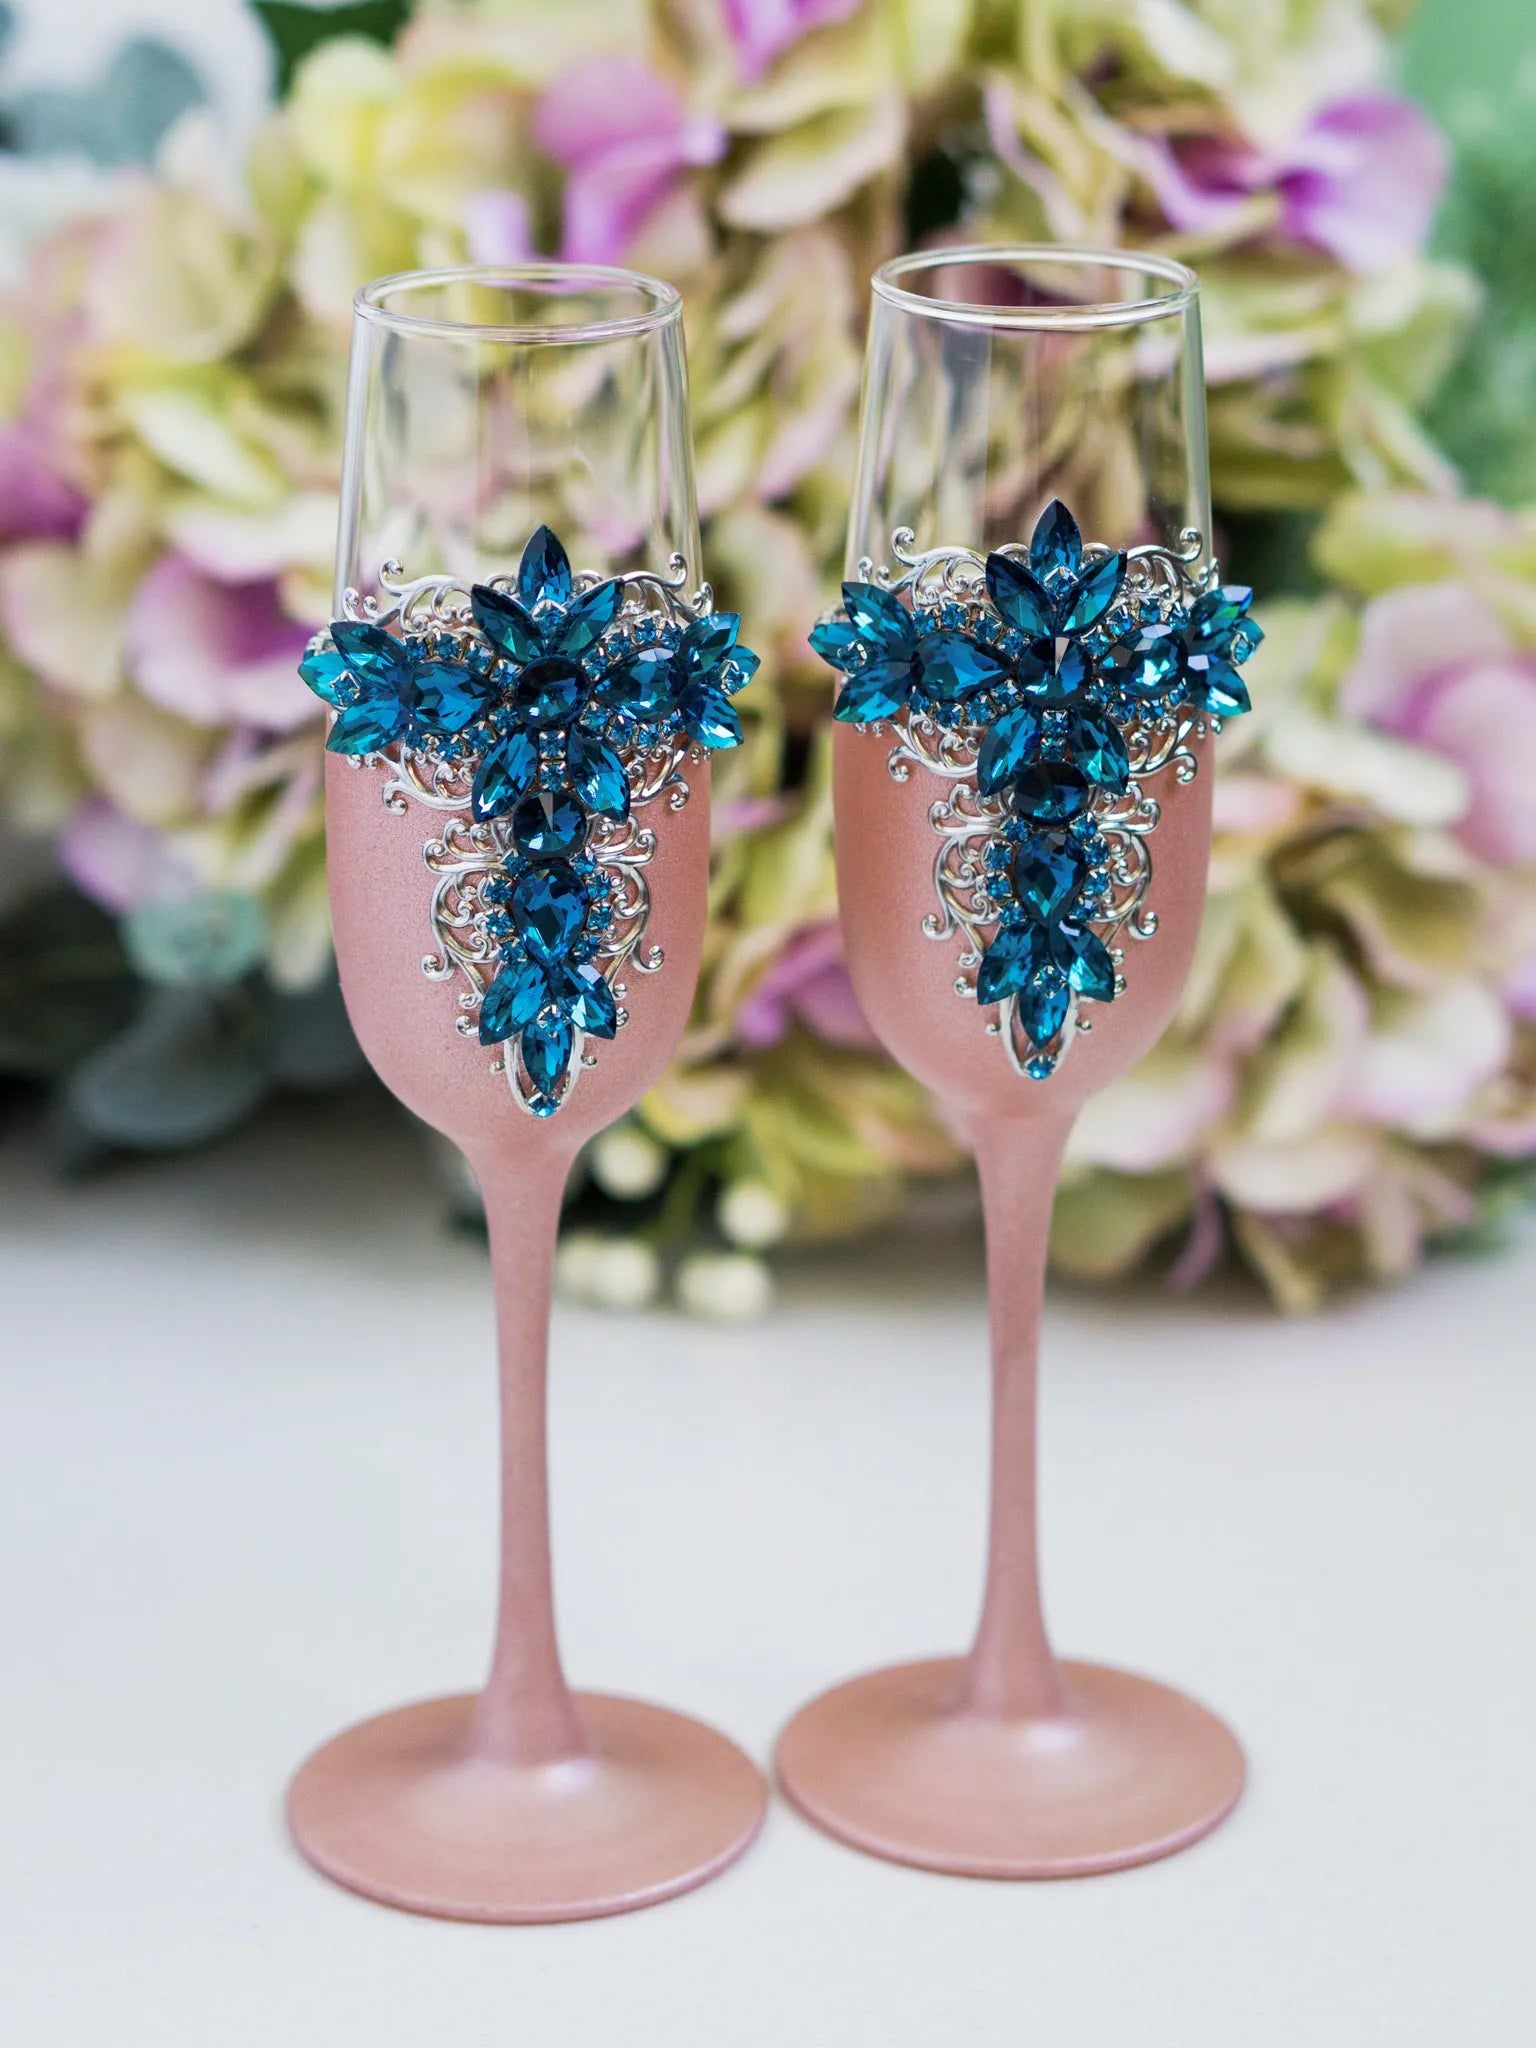 Unique Blue Teal and Rose Gold Crystals Wedding Toast Flutes and Cake Set